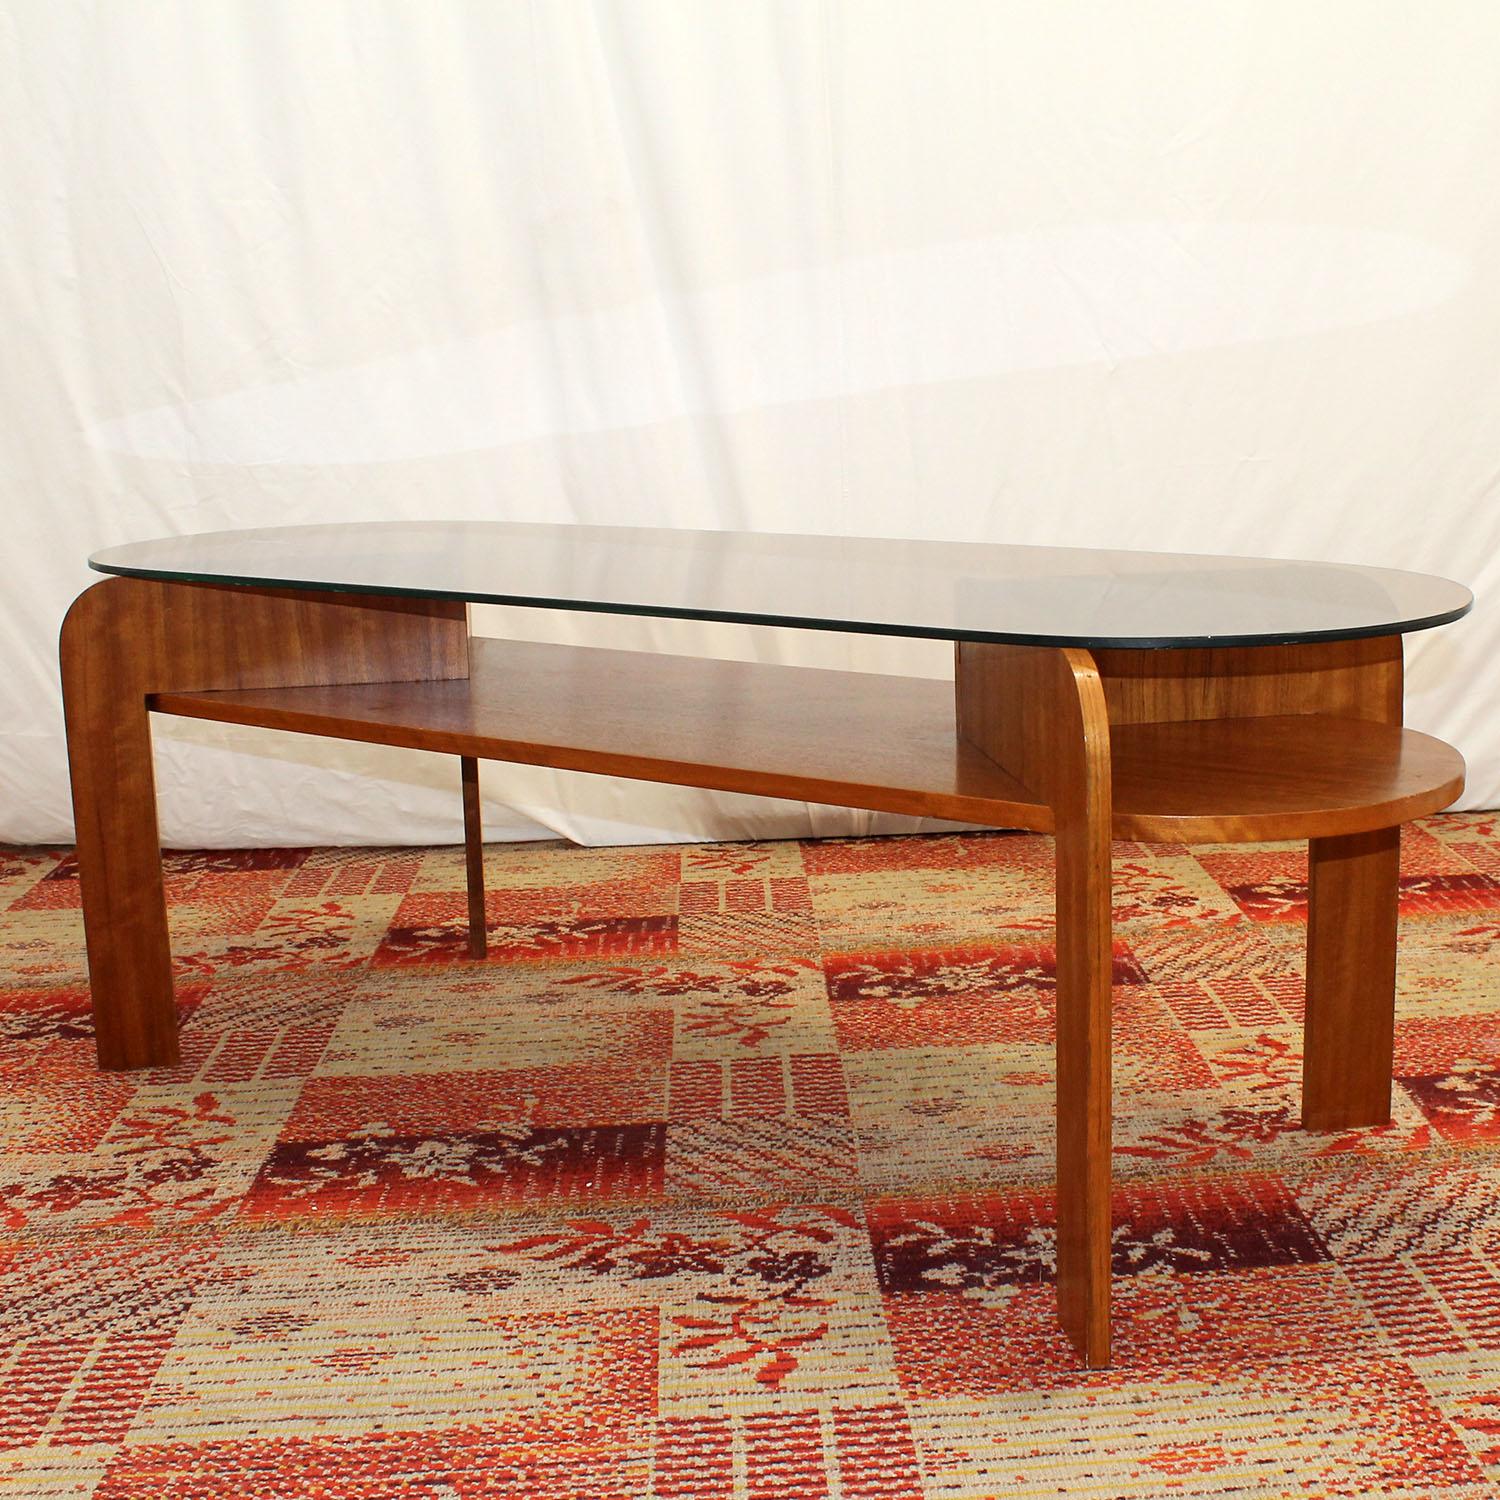 This coffee table was made in the former Czechoslovakia in the 1980’s. It´s made of mahogany wood and glass. The glass plate is removable.
The table is in very good Vintage condition.

Measures: Height 53 cm

Length 145 cm

Width 50 cm.